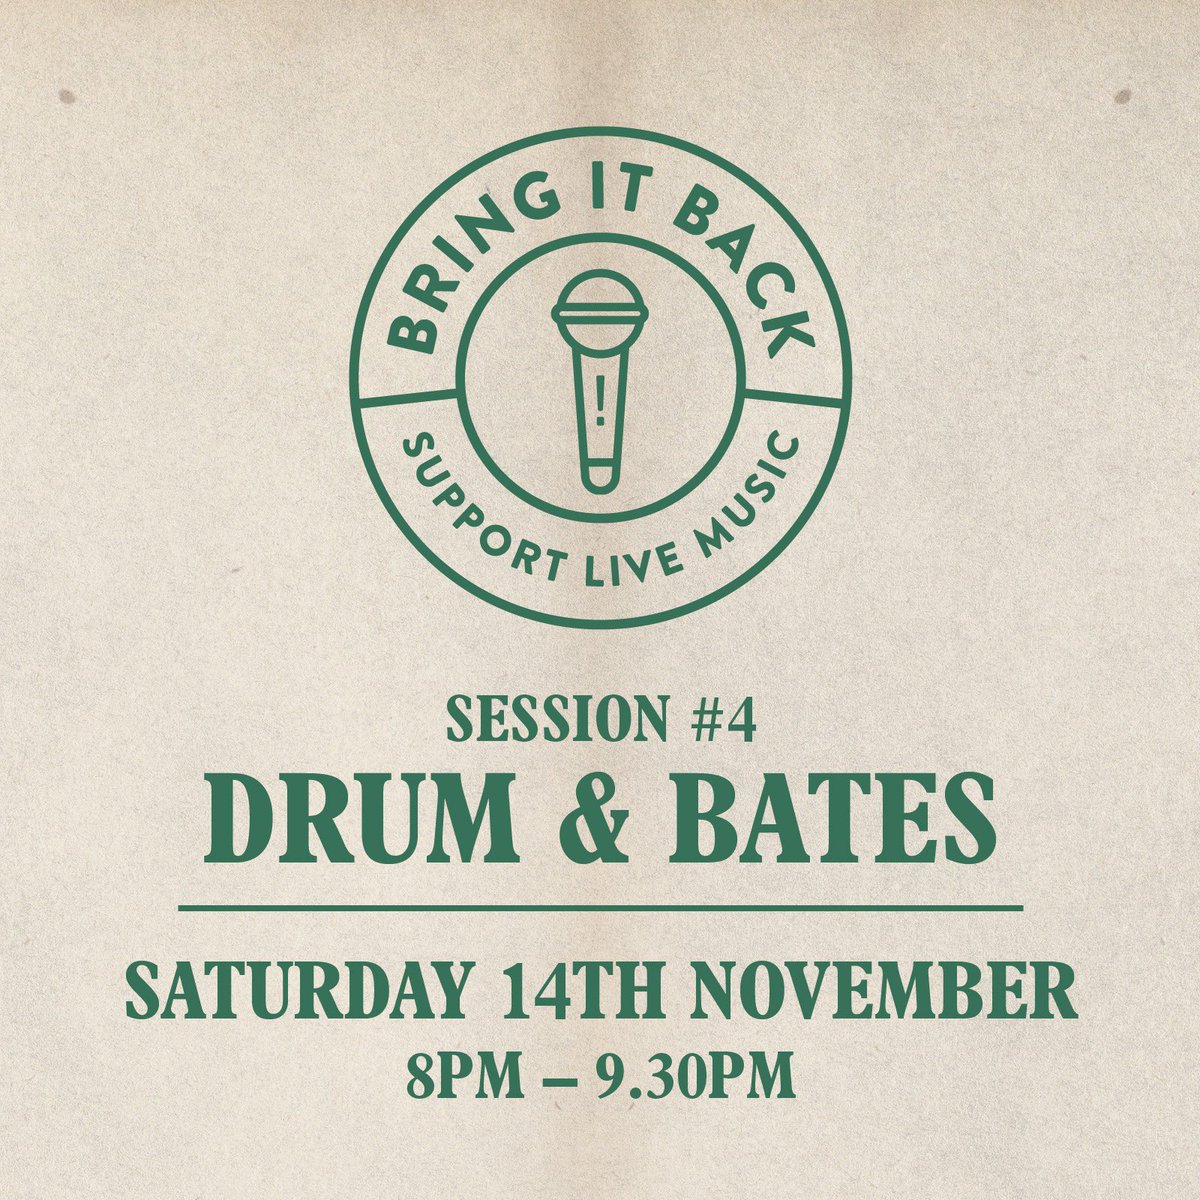 Amidst all the madness this week, it’s good to stay positive. Join us tomorrow at 8pm on our Facebook page for more live music with Drum & Bates #supportlivemusic